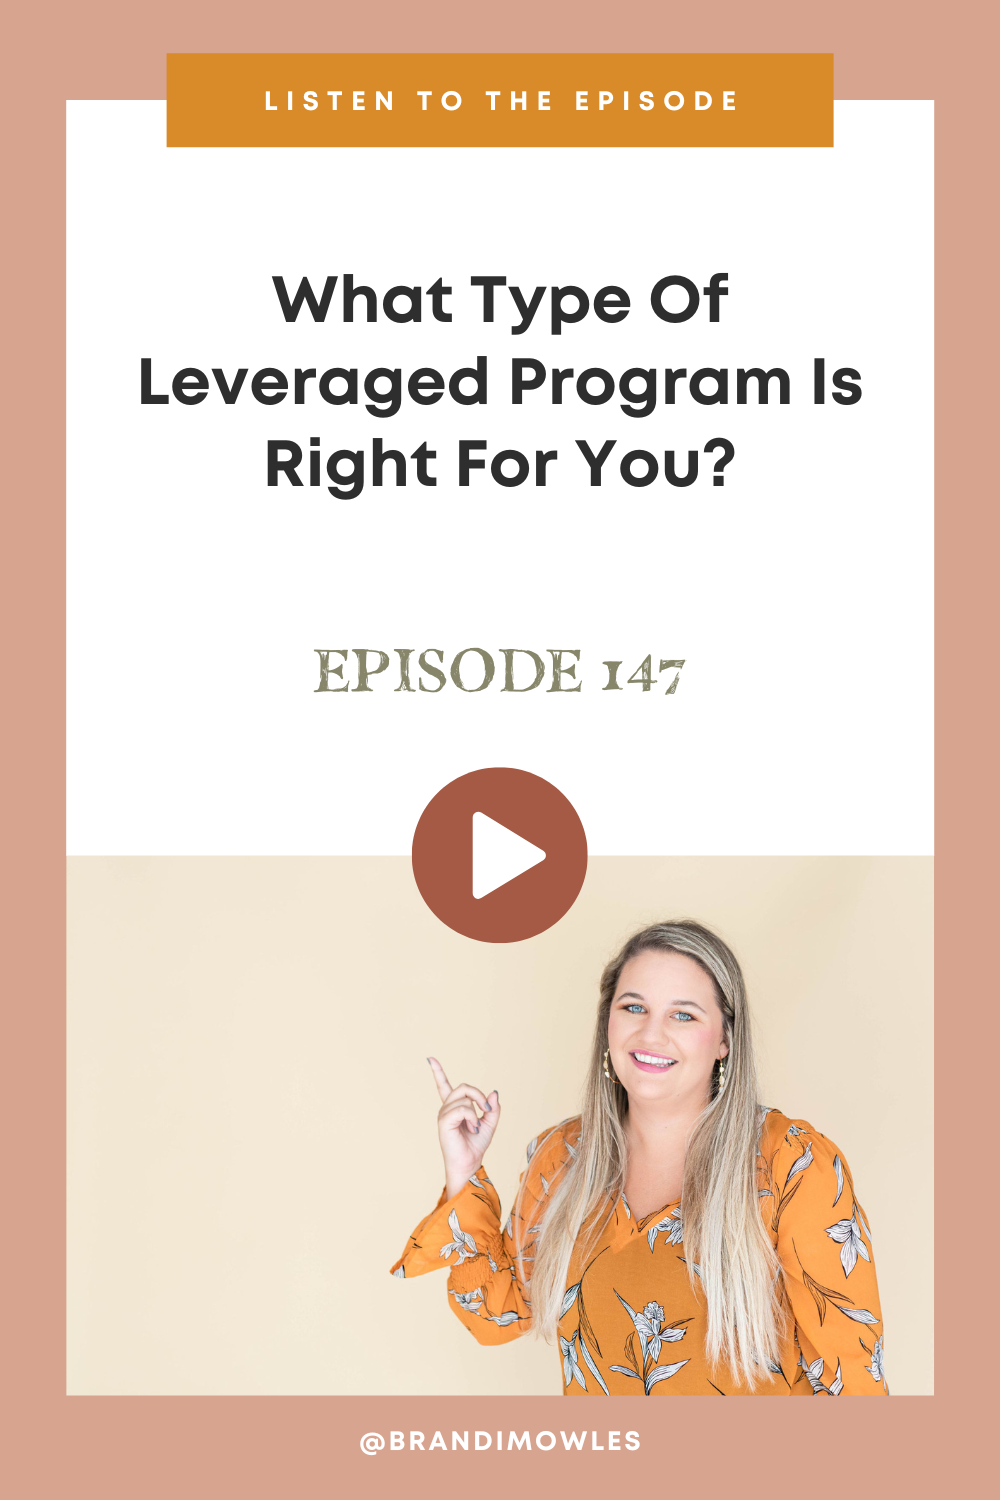 Brandi Mowles podcast episode feature about choosing programs